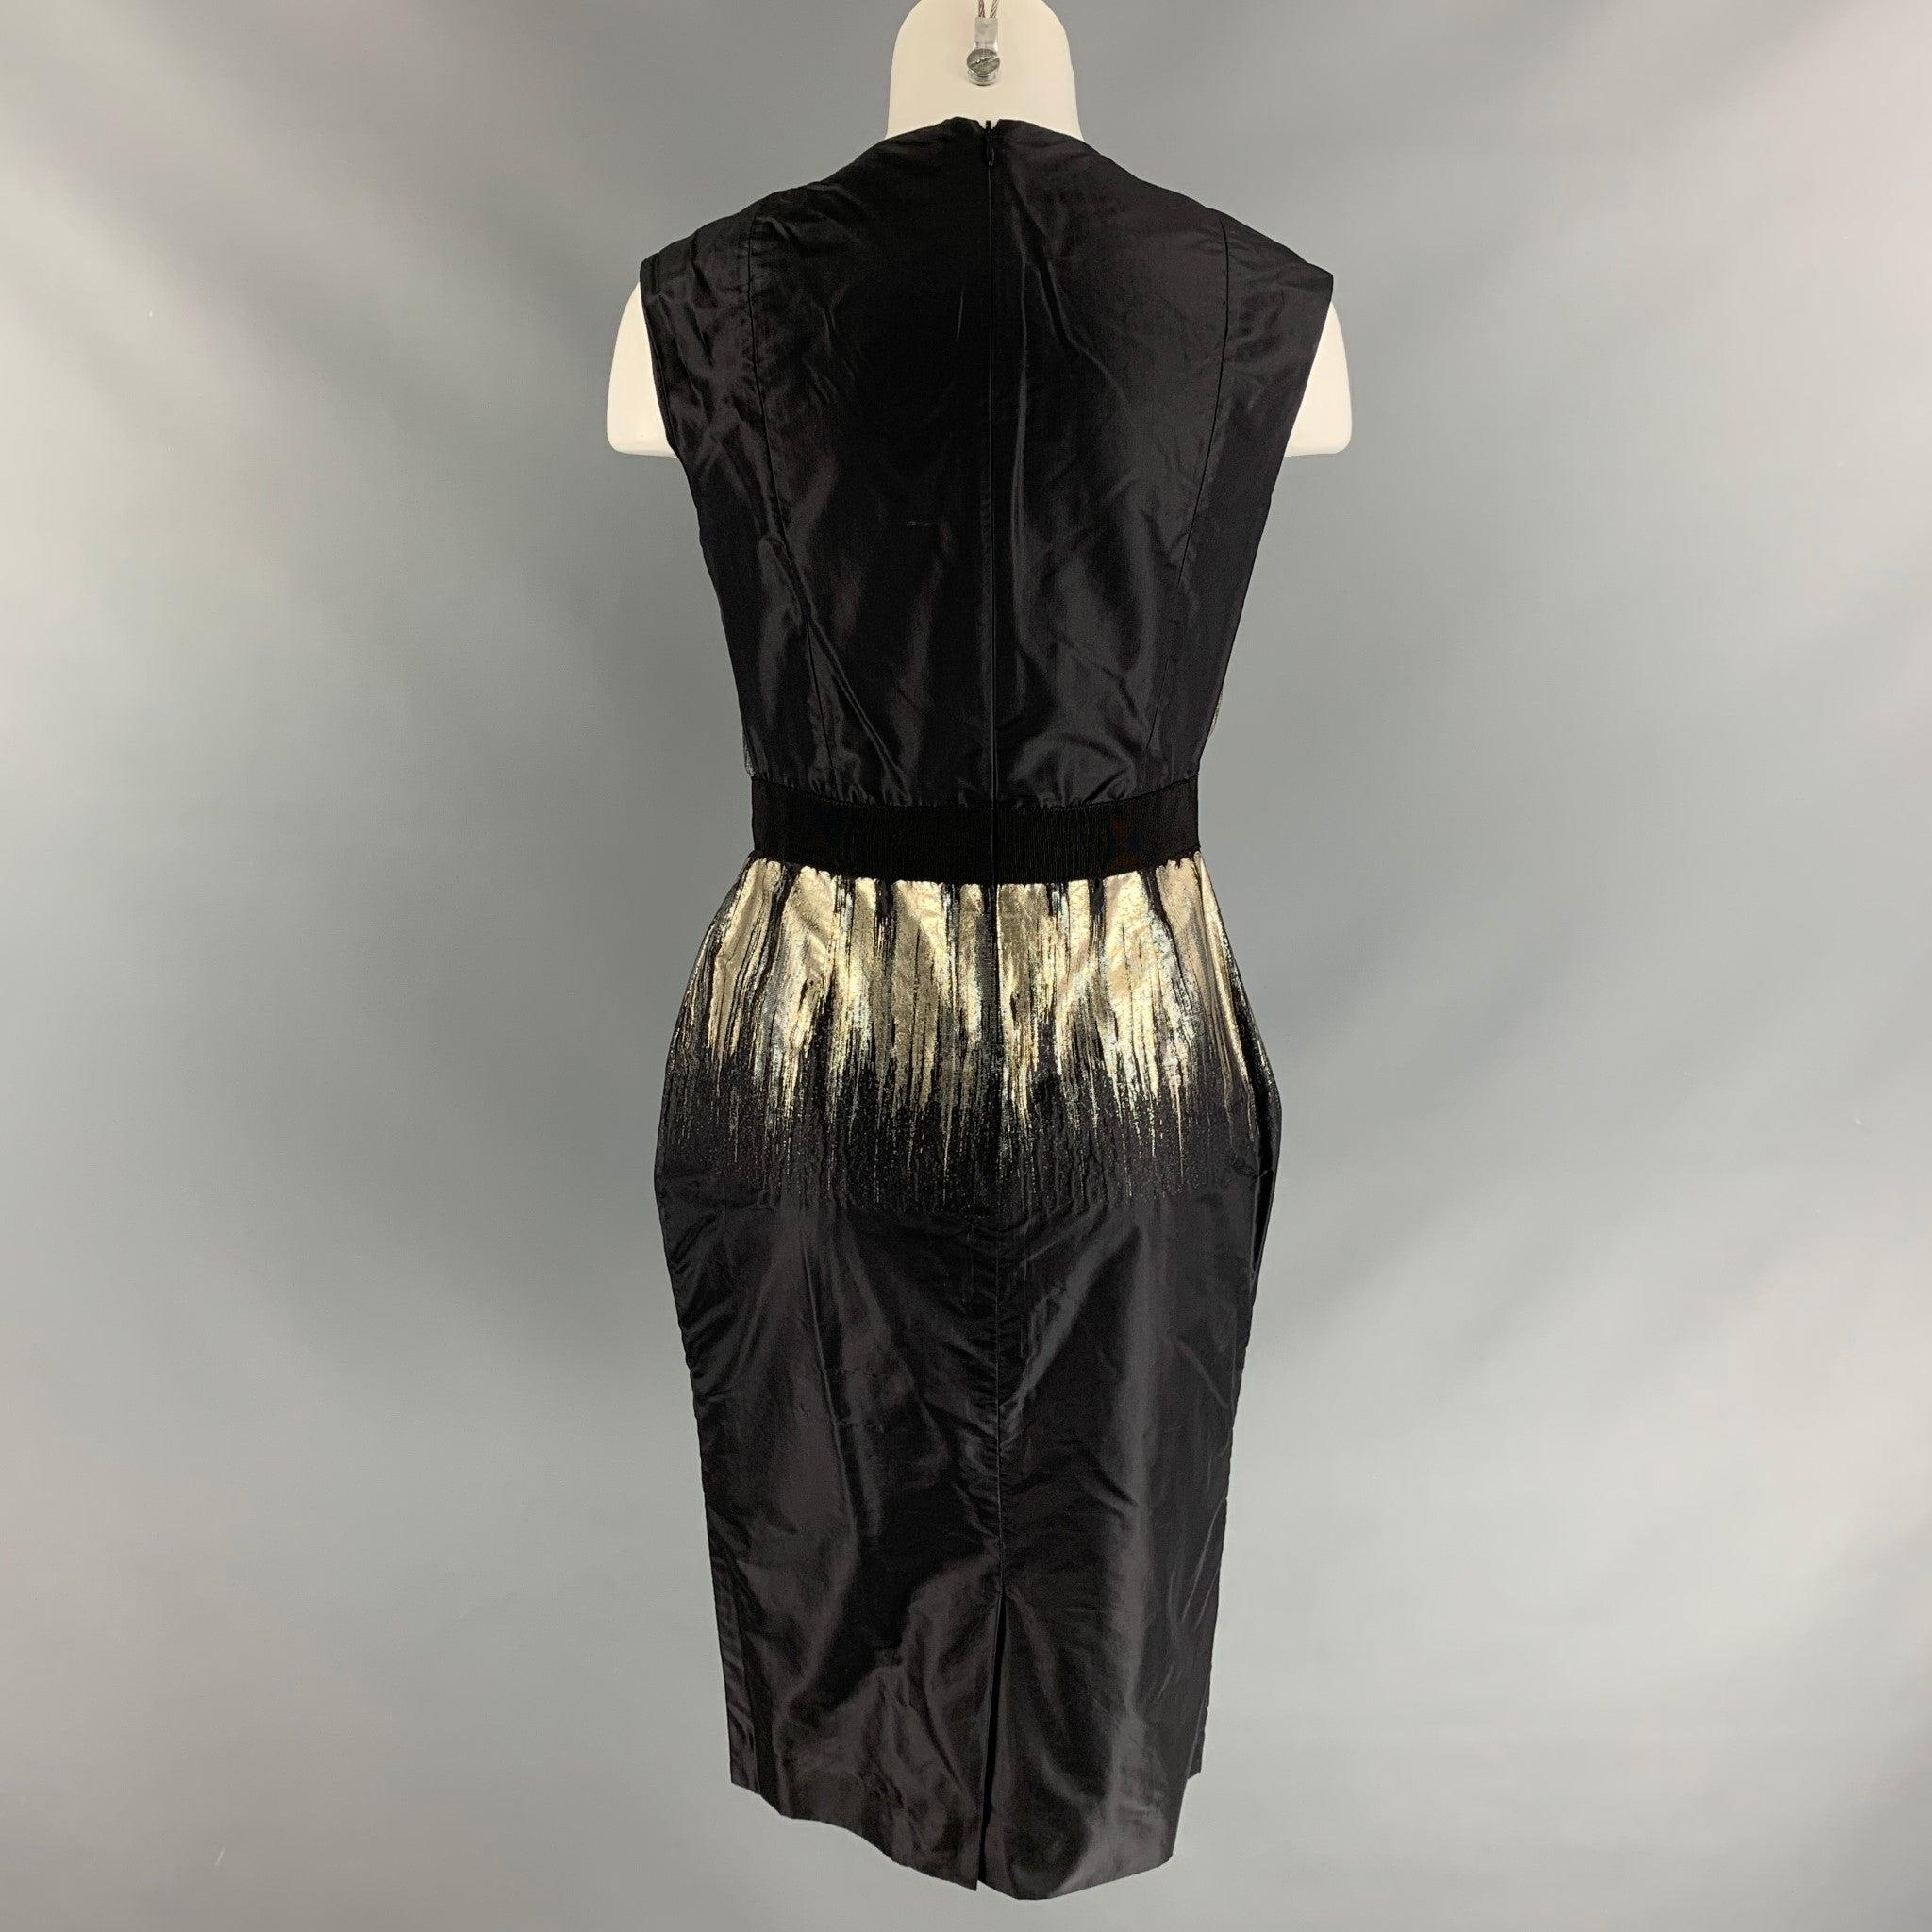 Women's PORTS 1961 Size 4 Black, Gold & Silver Ruched Cocktail Dress